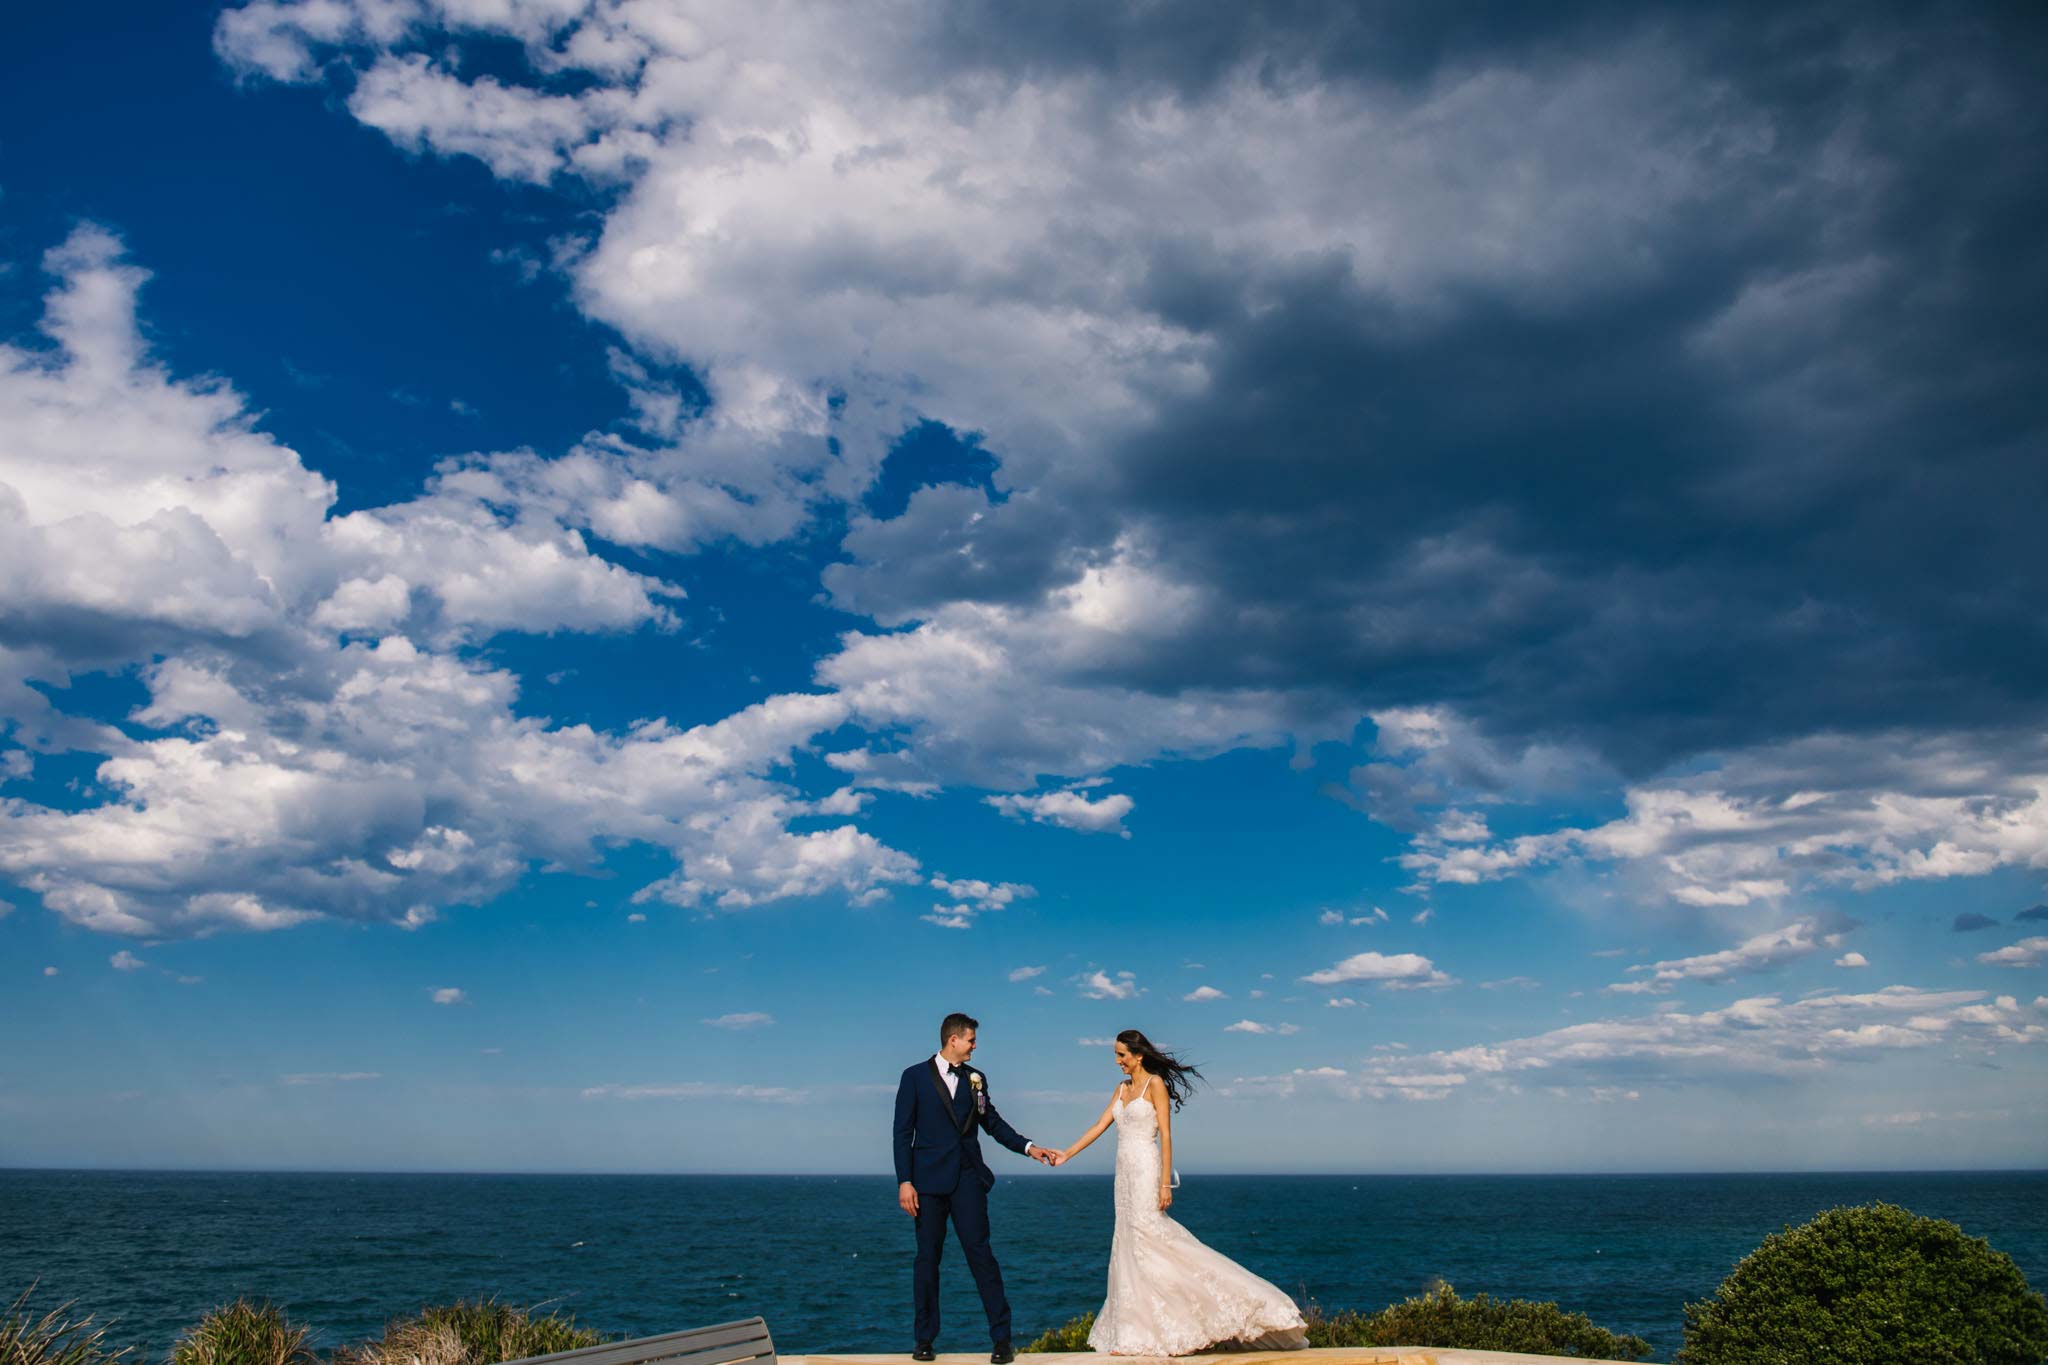 Beautiful view of the ocean at Freshwater headland with newlyweds walking along stone wall